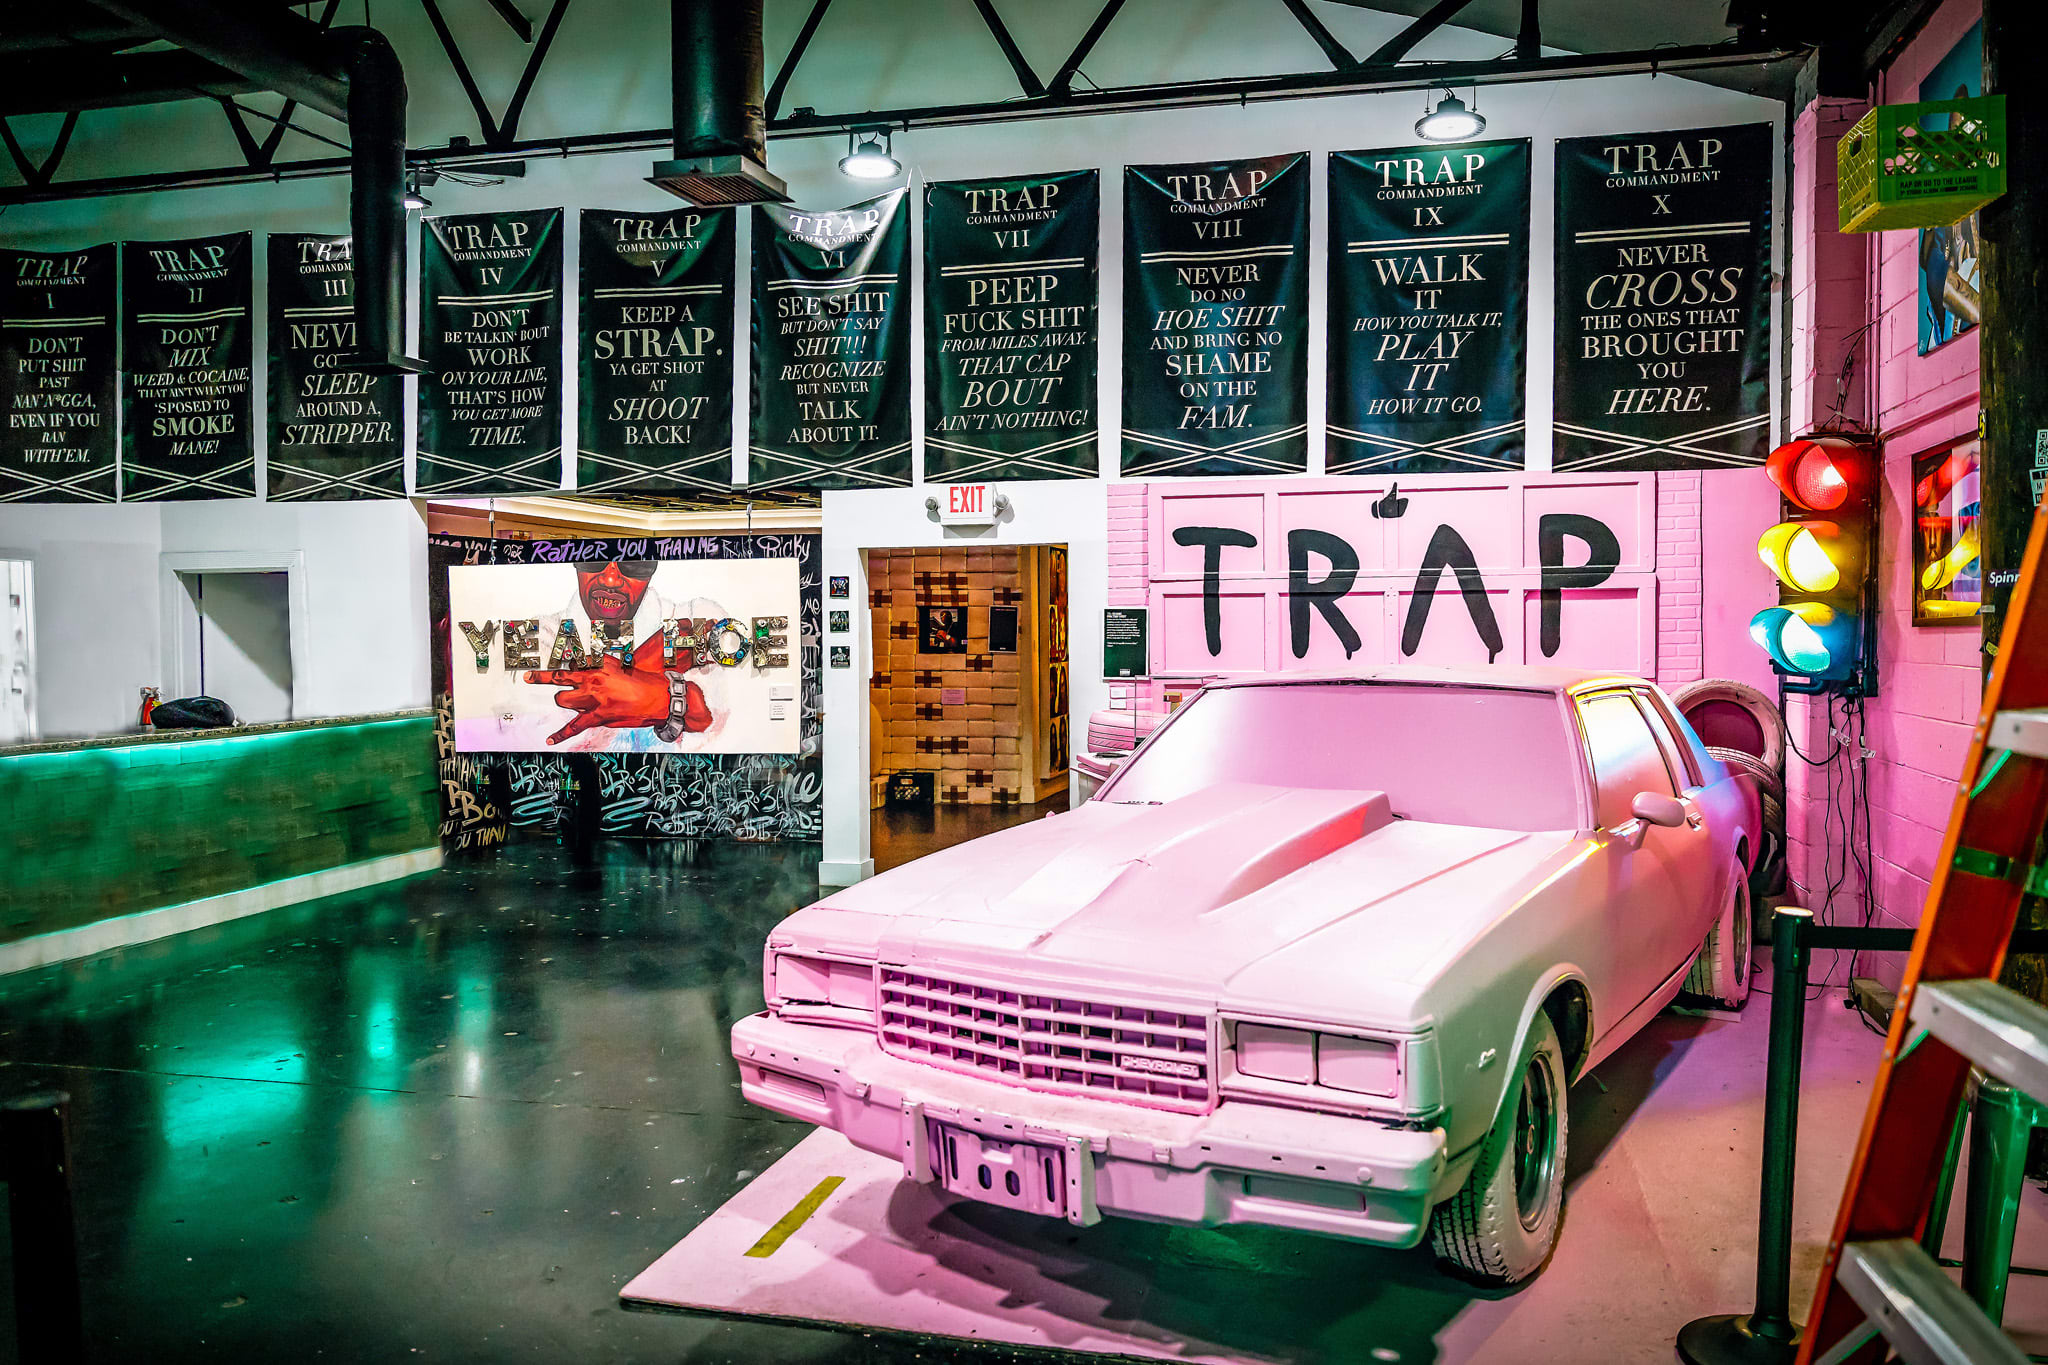 The Trap Music Museum has quickly become on the top places to visit in Atlanta